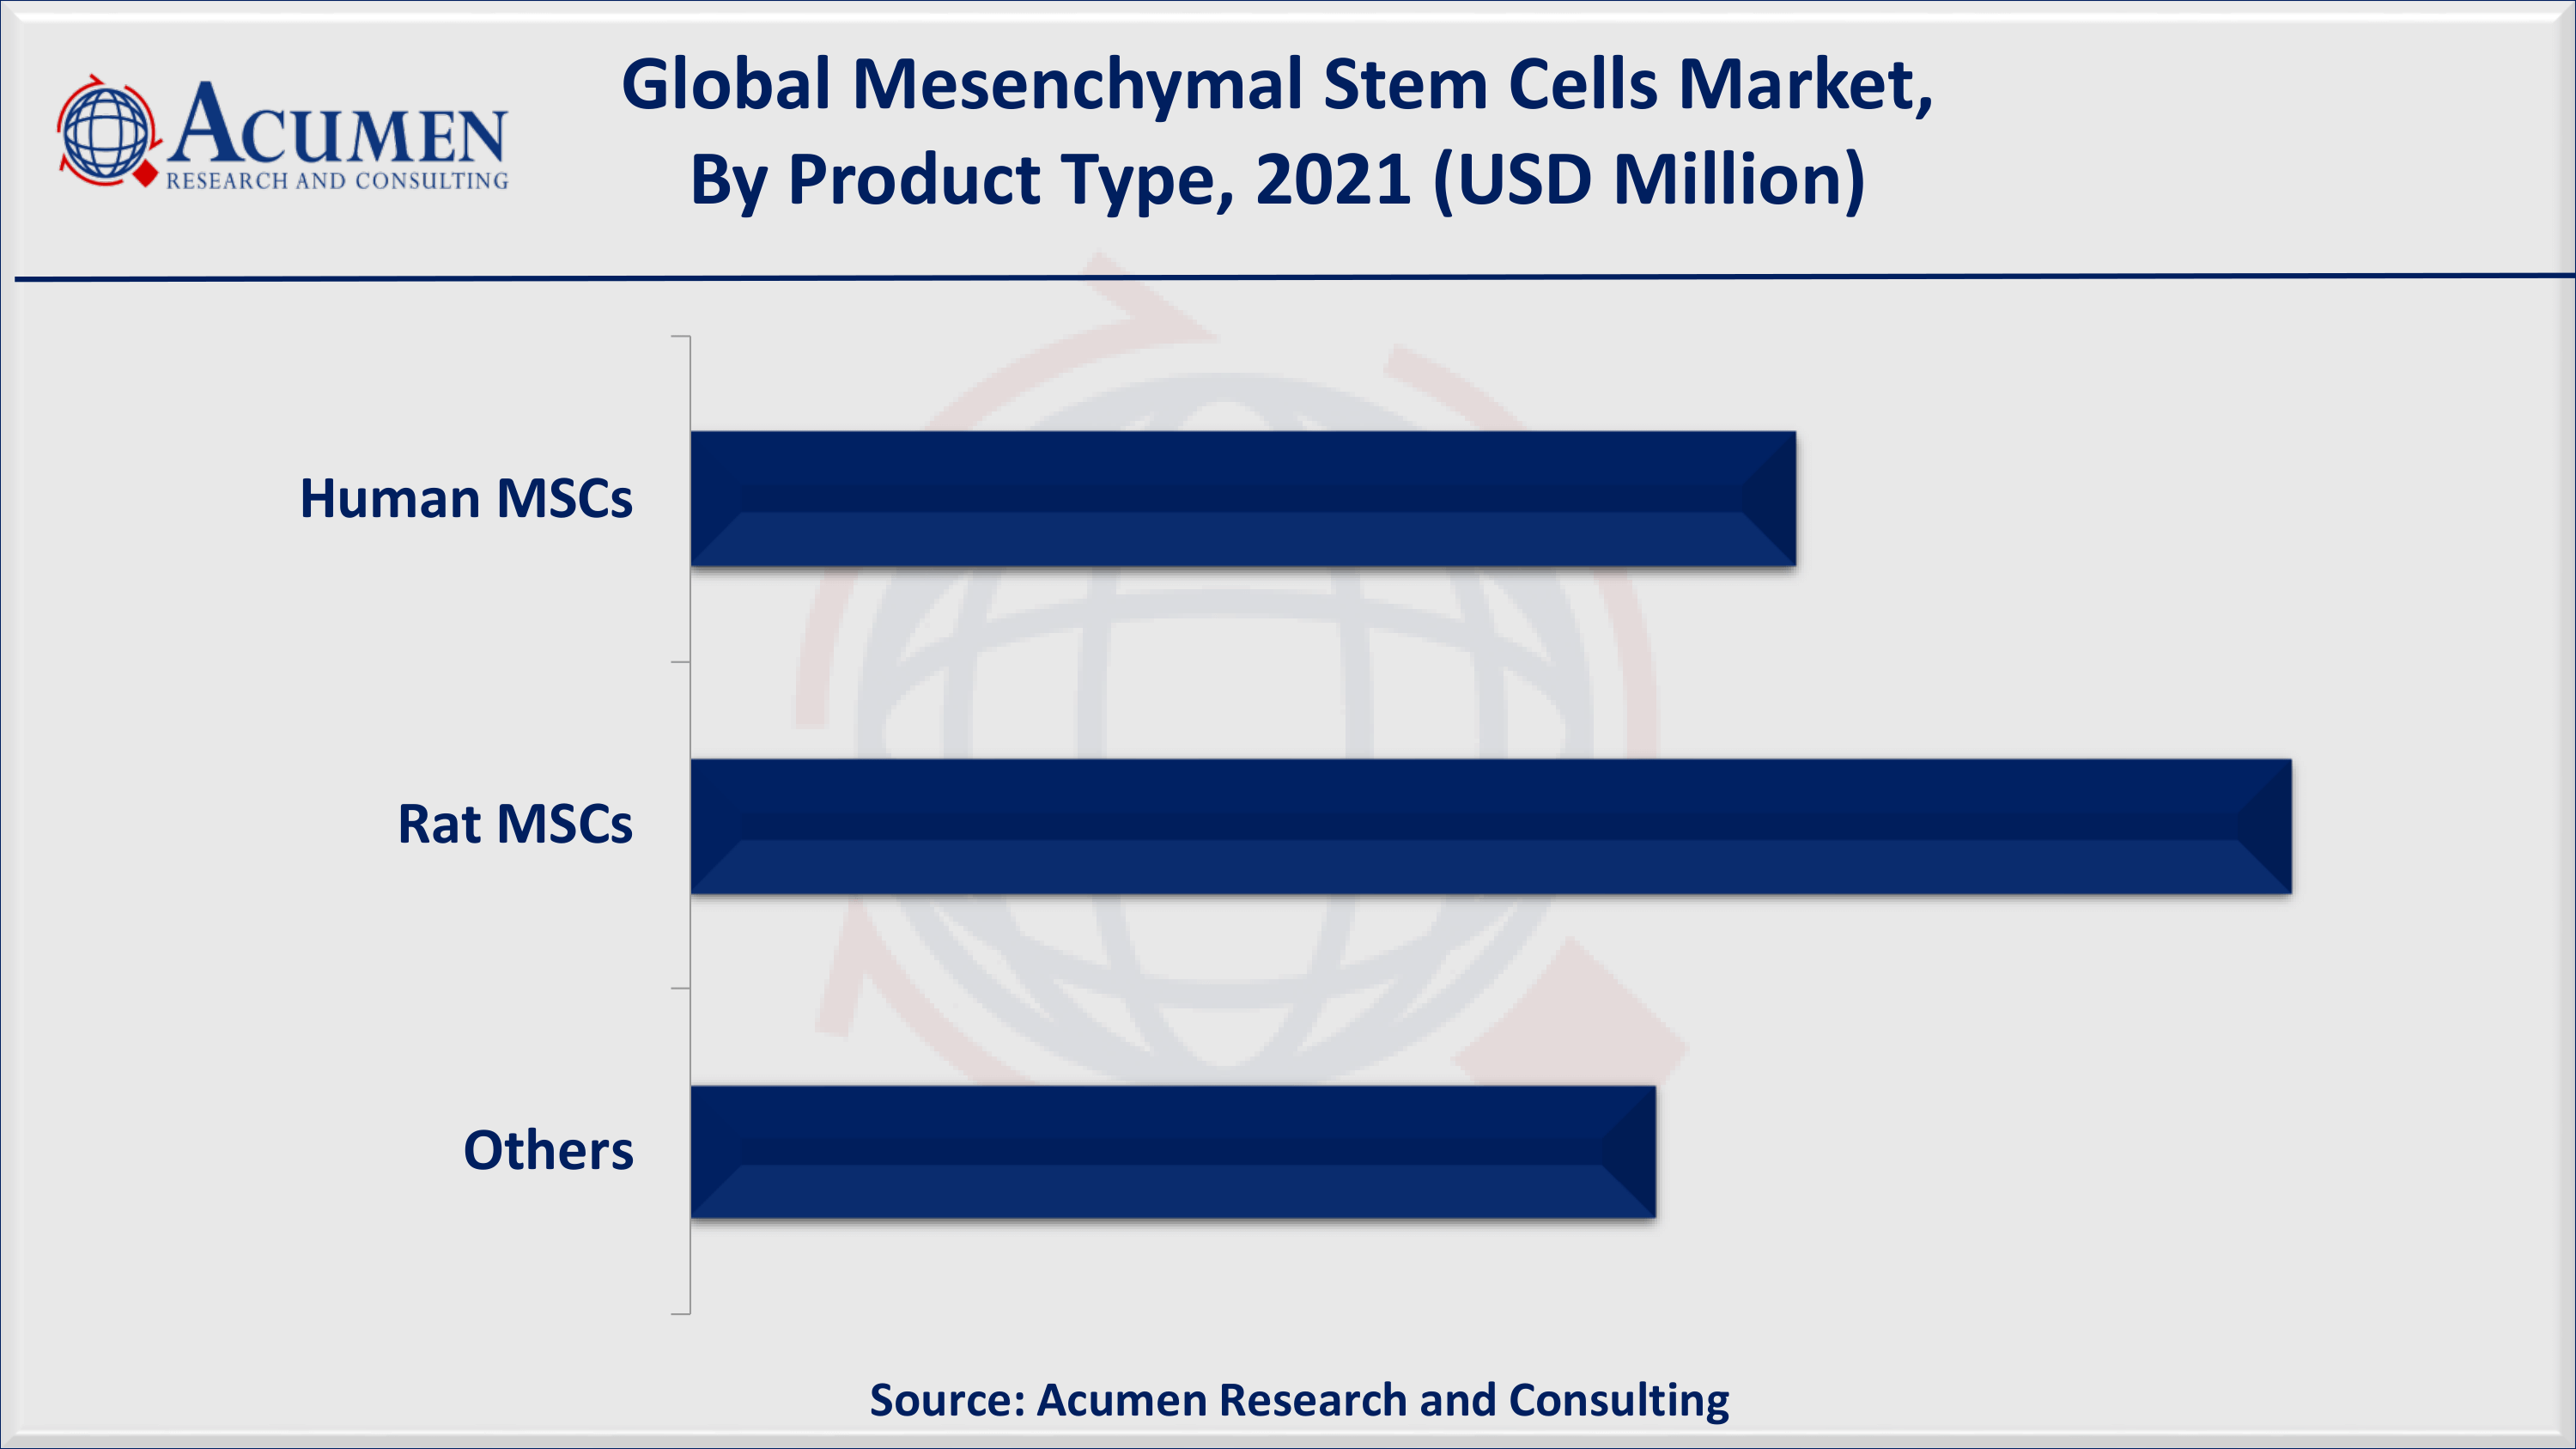 Based on product, rat MSCs accounted for over 43% of the overall market share in 2021